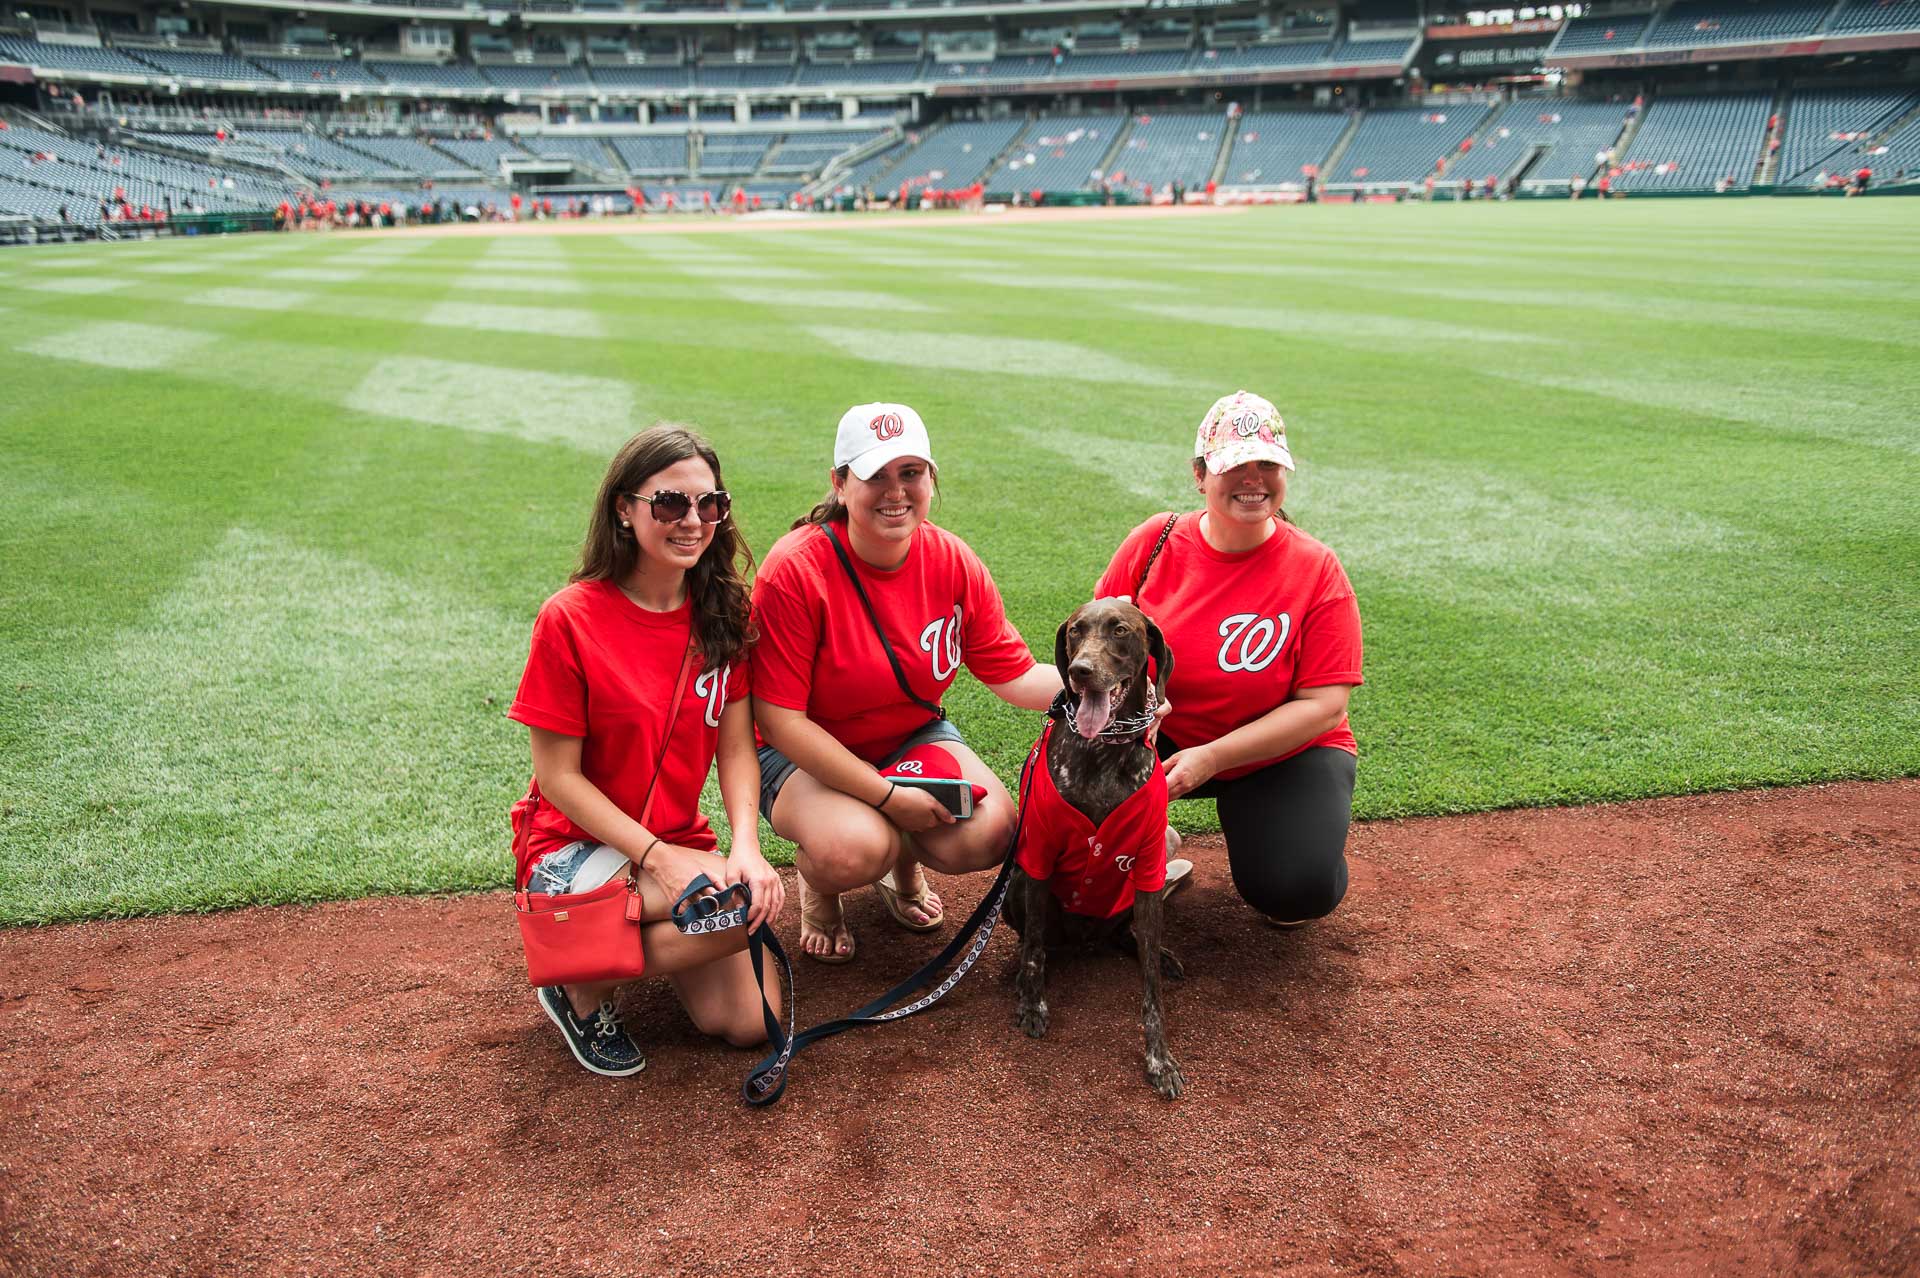 Nats Park goes to the dogs at 'Pups in the Park' DC Refined